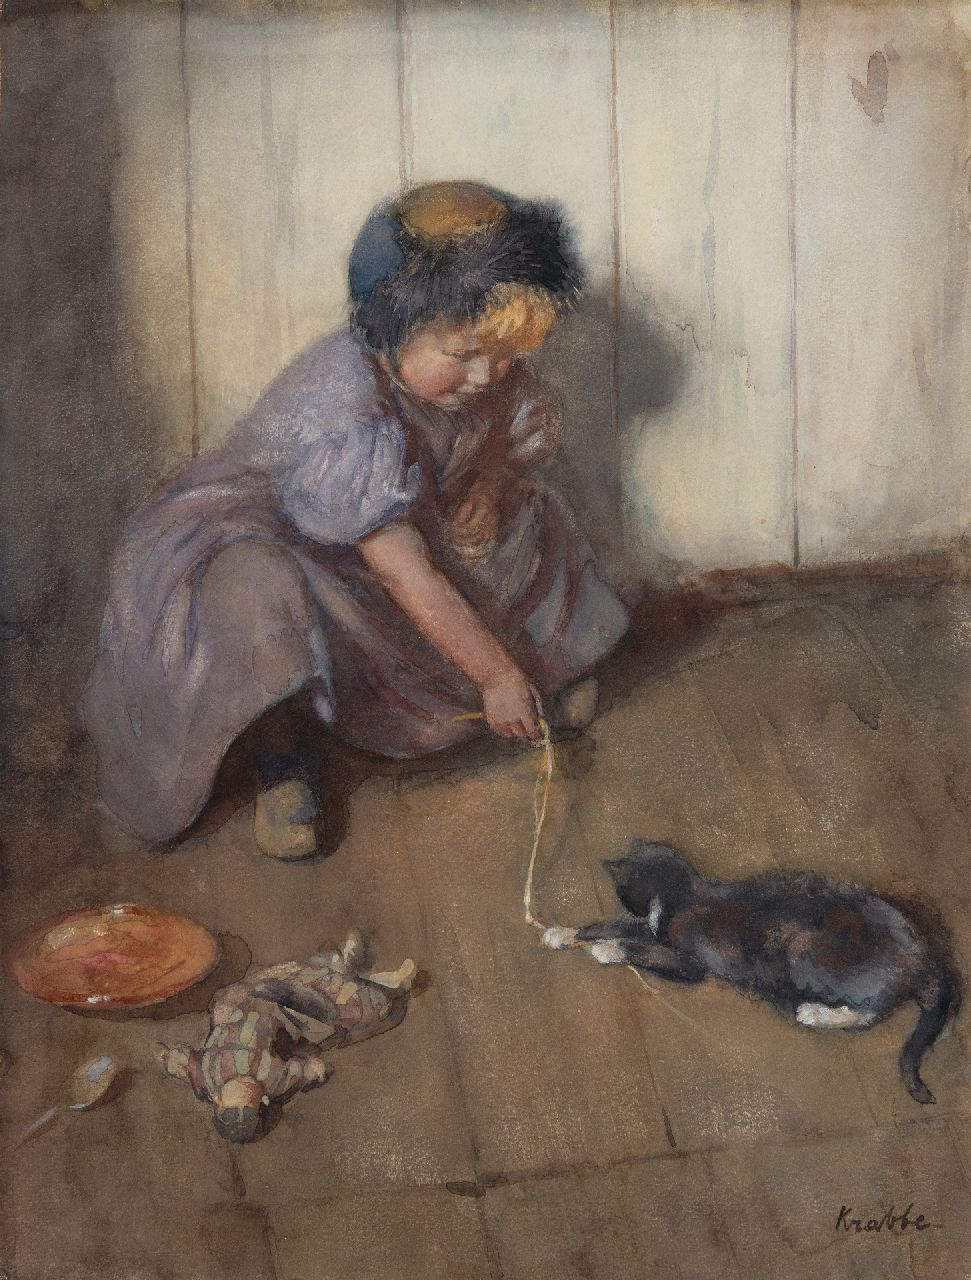 Krabbé H.M.  | Heinrich Martin Krabbé | Watercolours and drawings offered for sale | Playing with the cat, watercolour on paper 47.5 x 36.0 cm, signed l.r. and painted 1906-1916